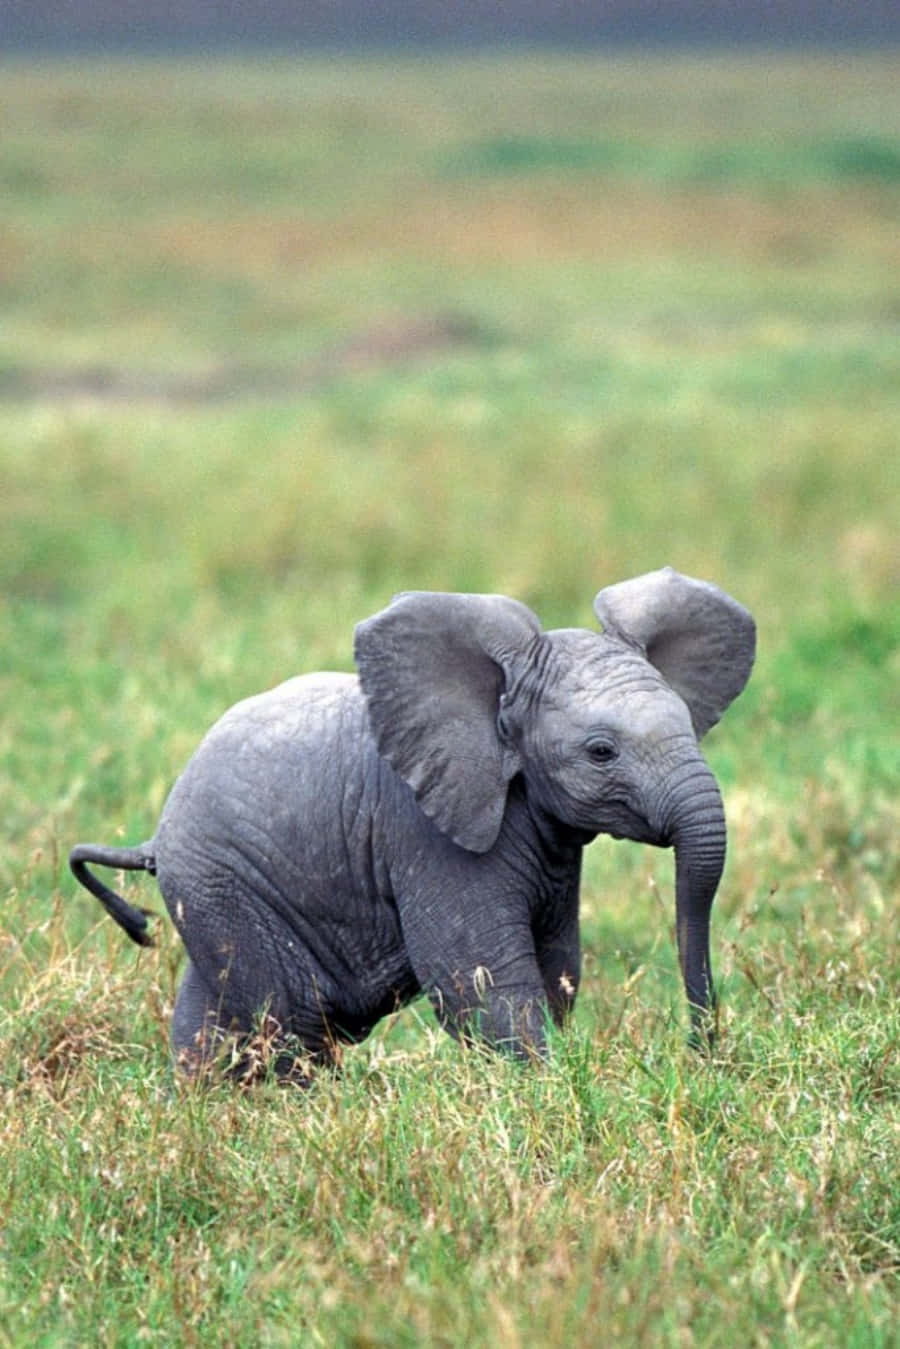 Look how adorable this elephant is!